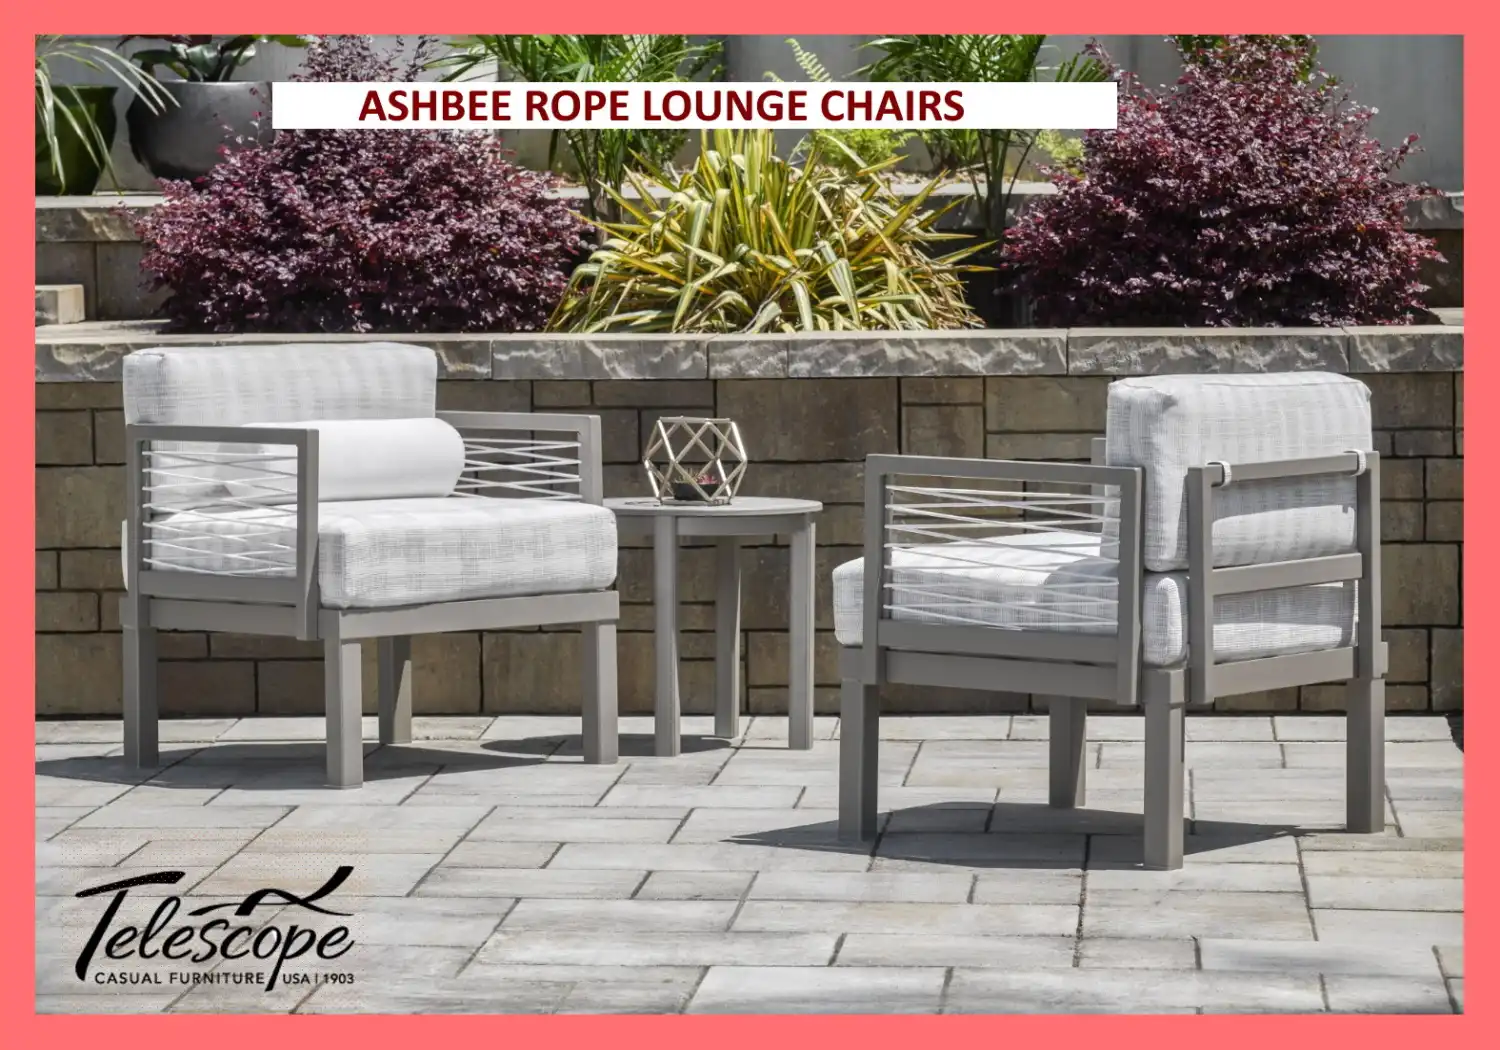 ASHBEE ROPE LOUNGE CHAIRS